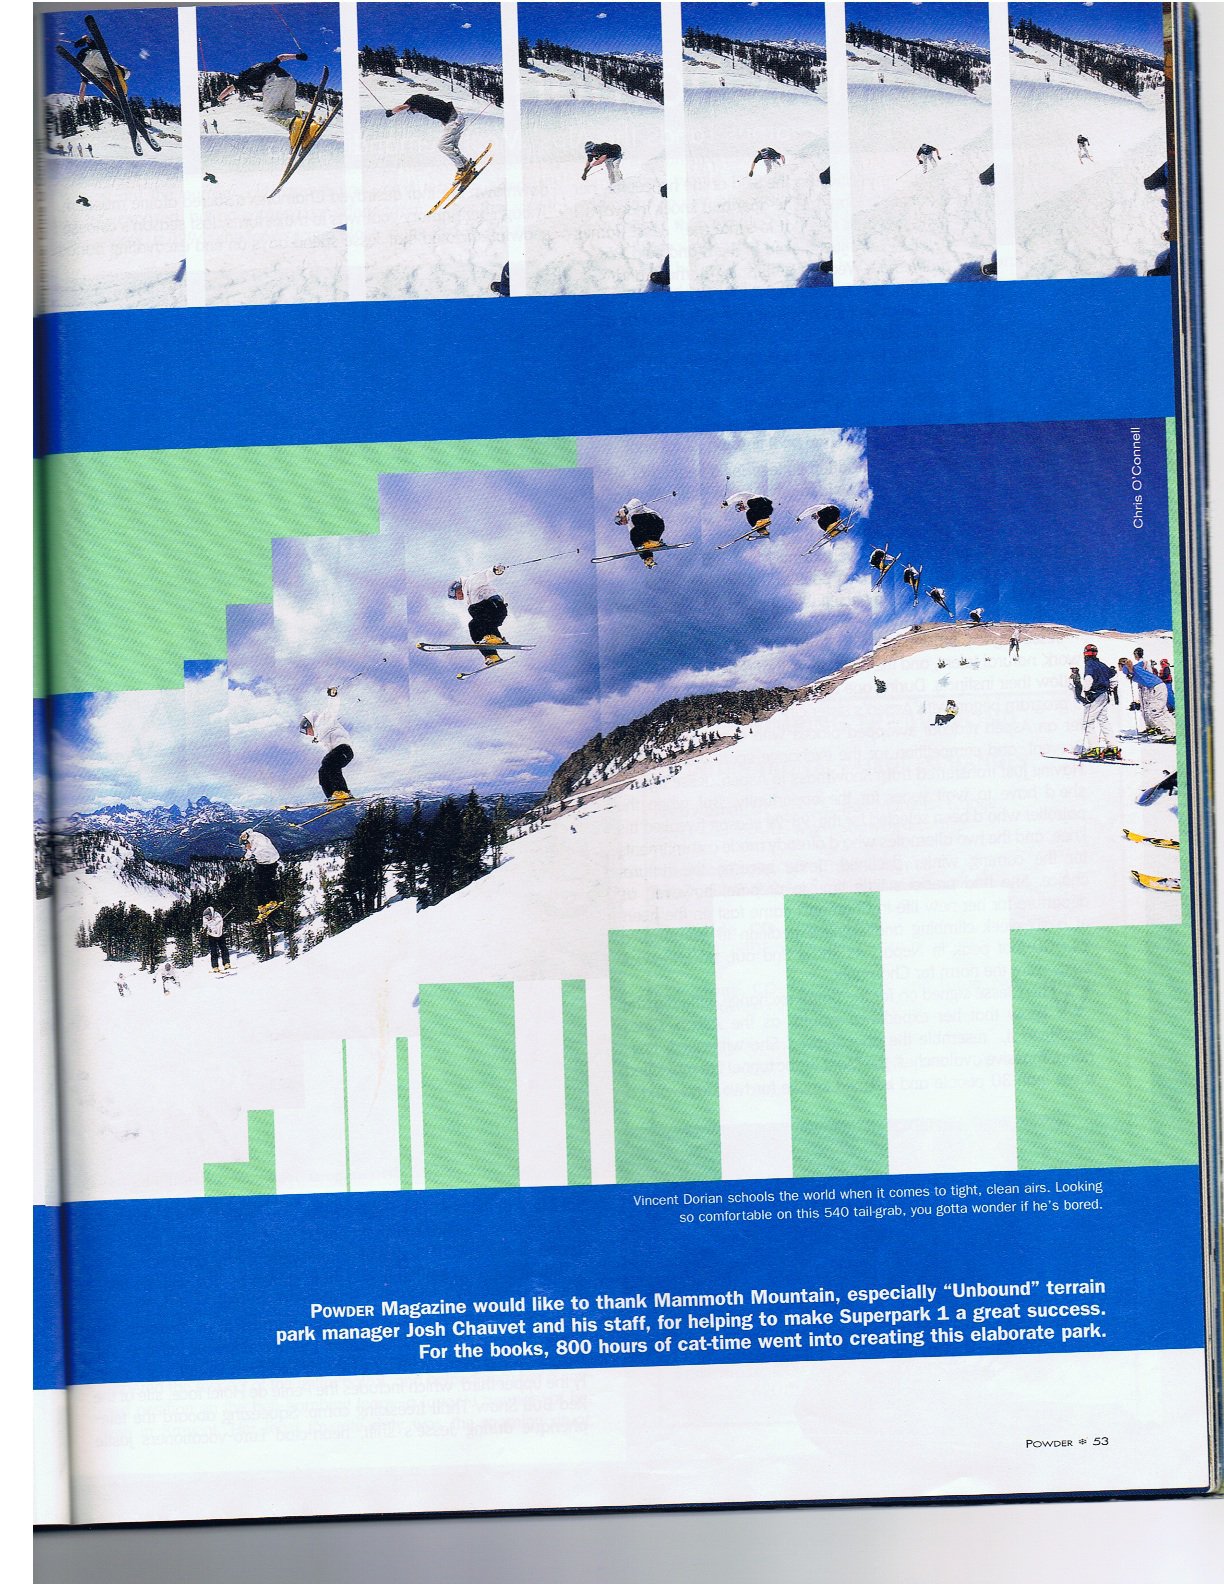 Superpark 1 article - page8 (final)